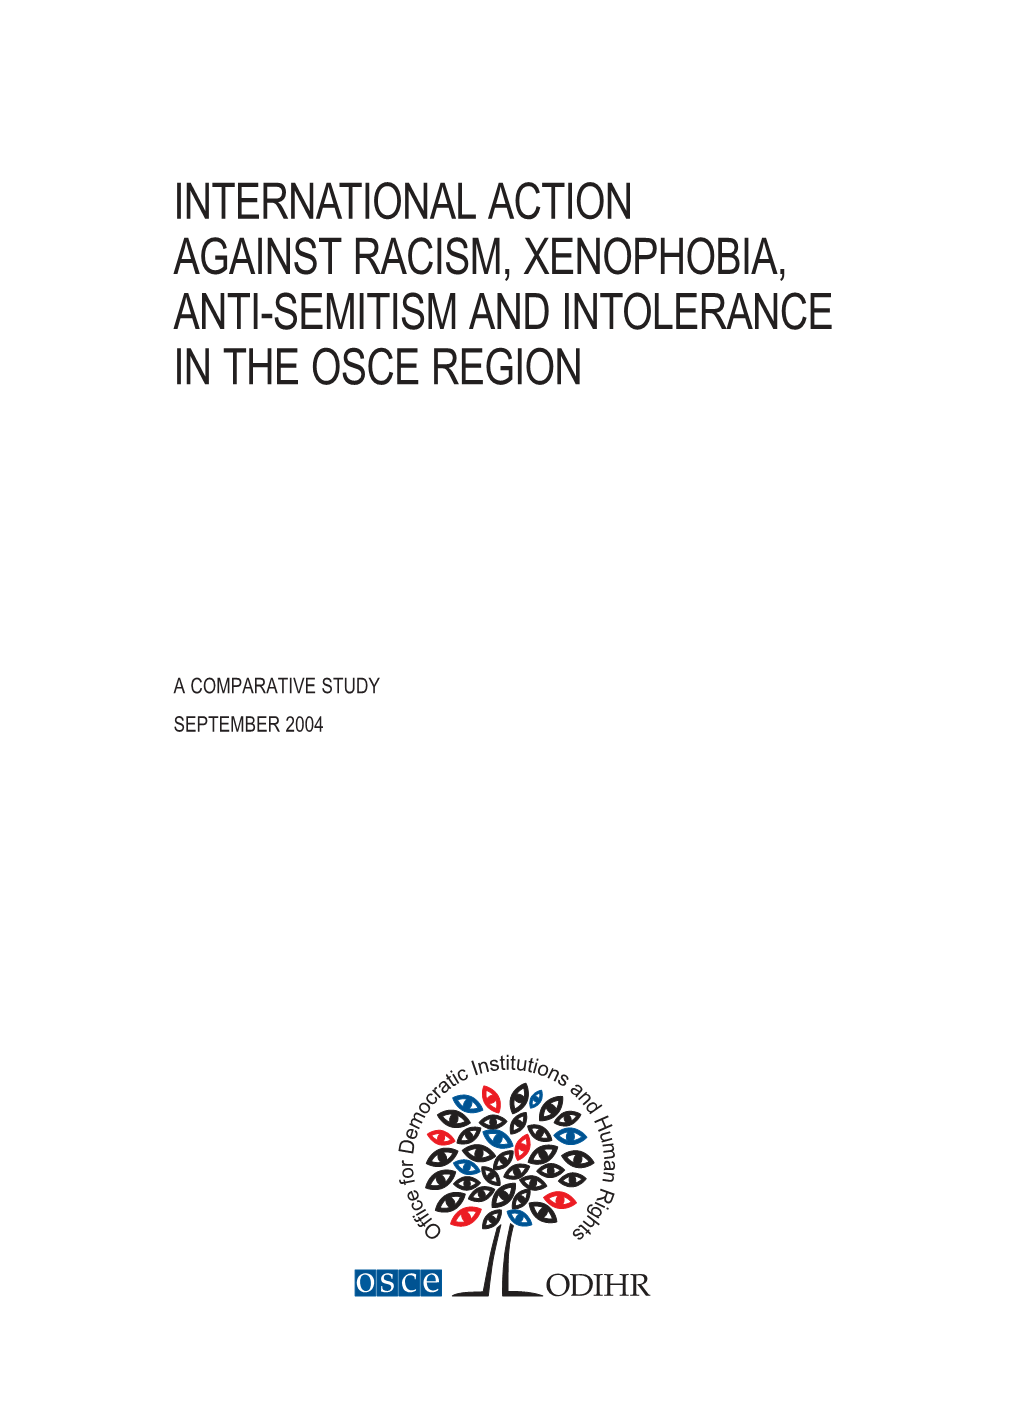 International Action Against Racism, Xenophobia, Anti-Semitism and Intolerance in the Osce Region